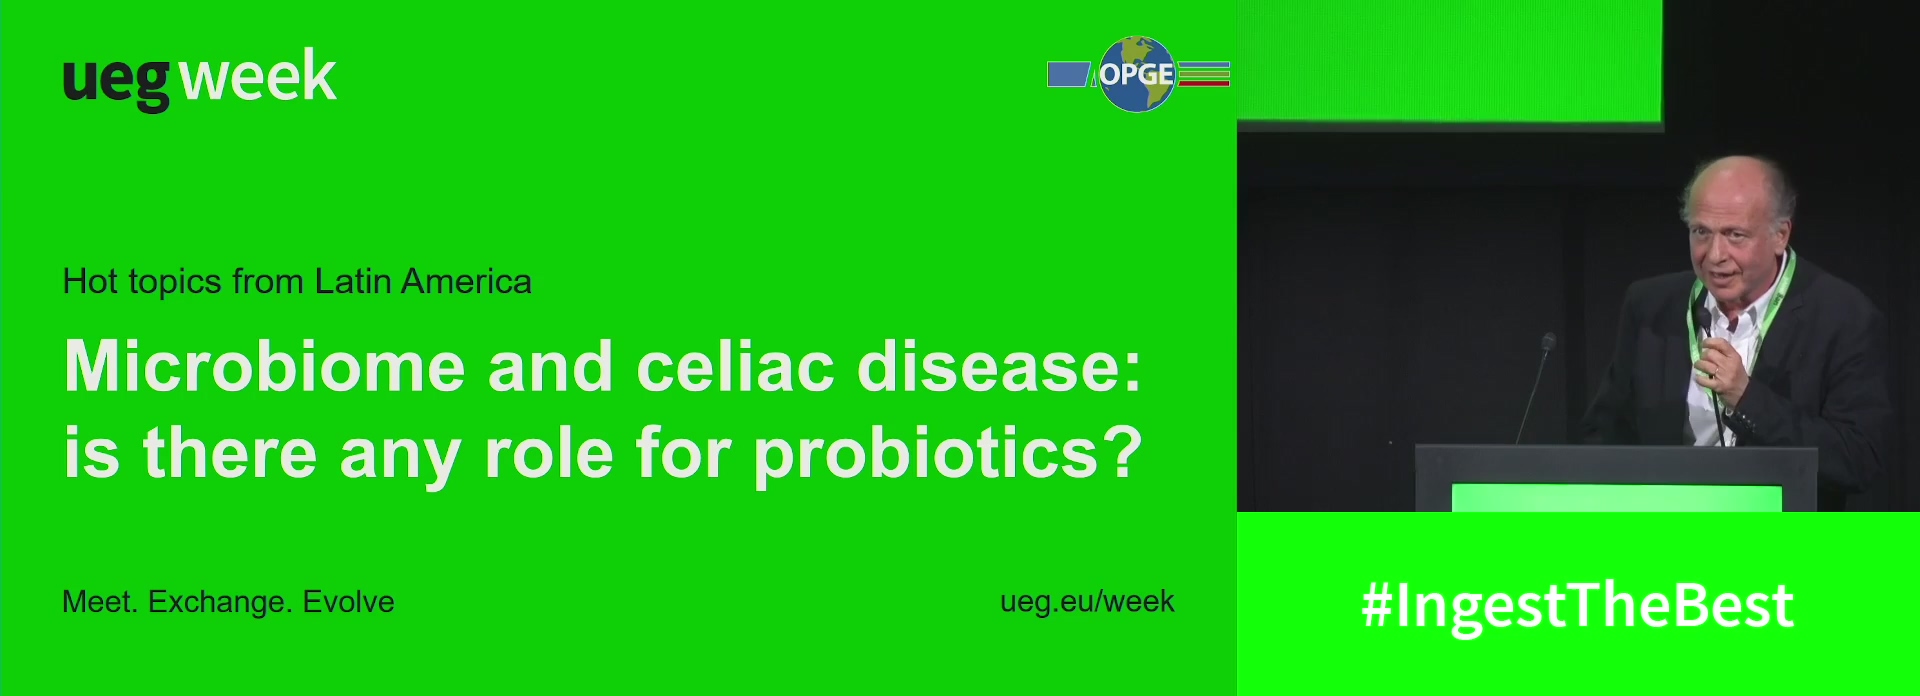 Microbiome and celiac disease: Microbiome and celiac disease: is there any role for probiotics?